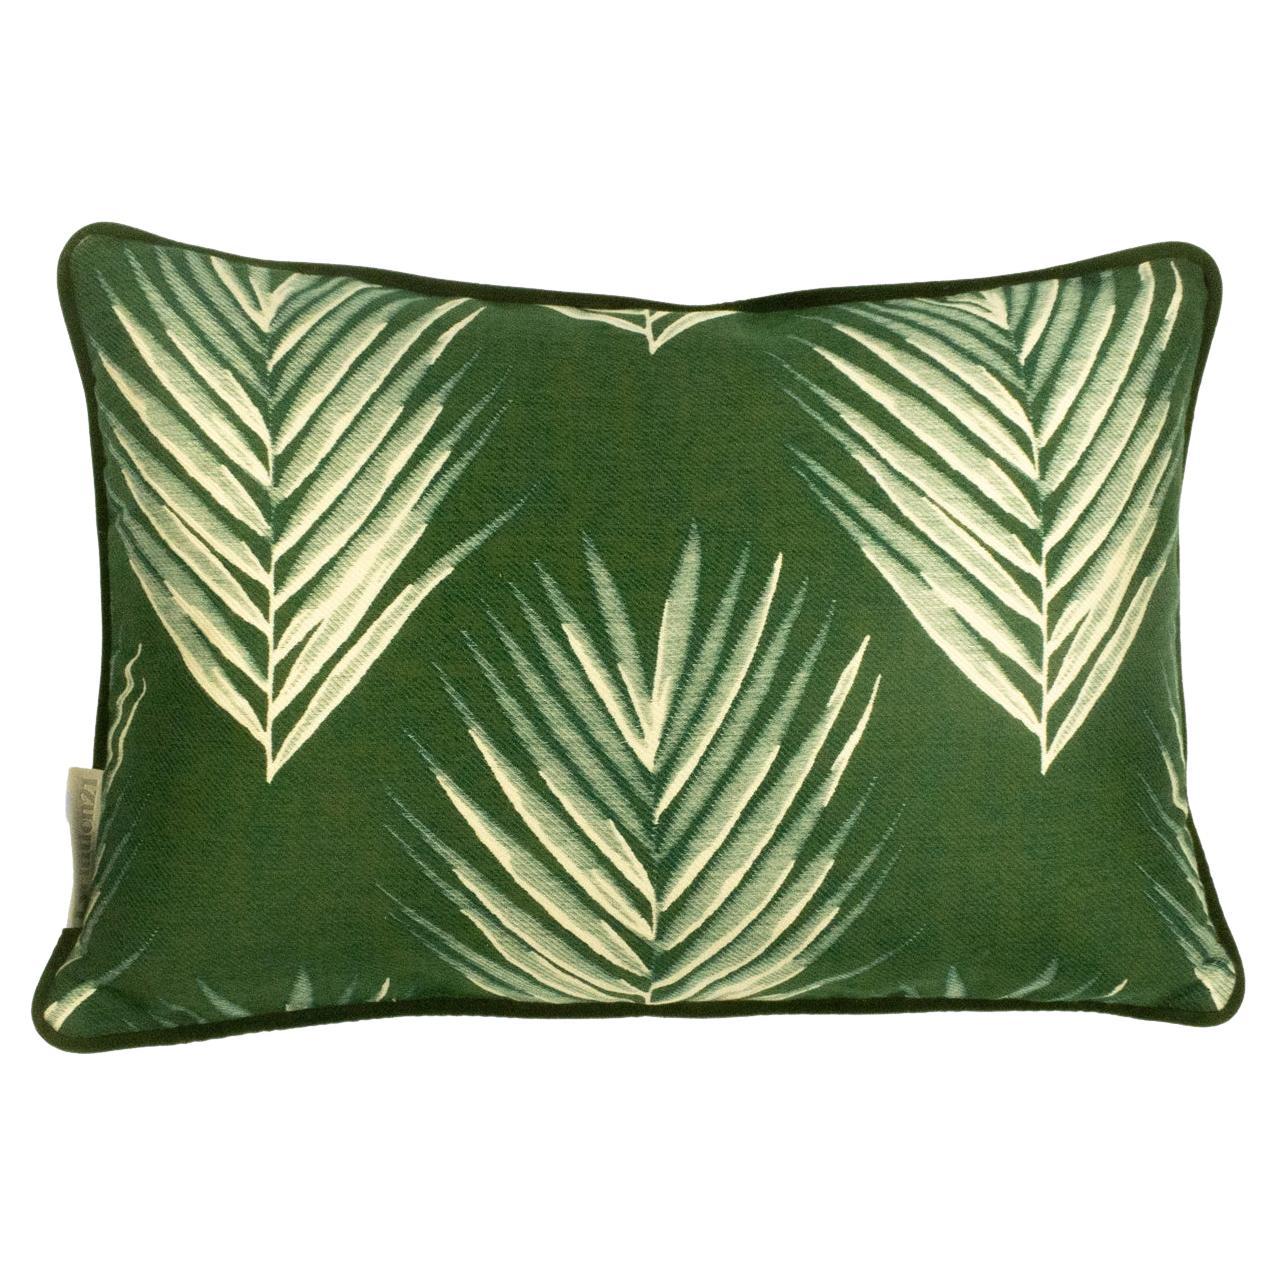 Cushion / Pillow Patterned Bamboo Reverse Leaf Green by Evolution21